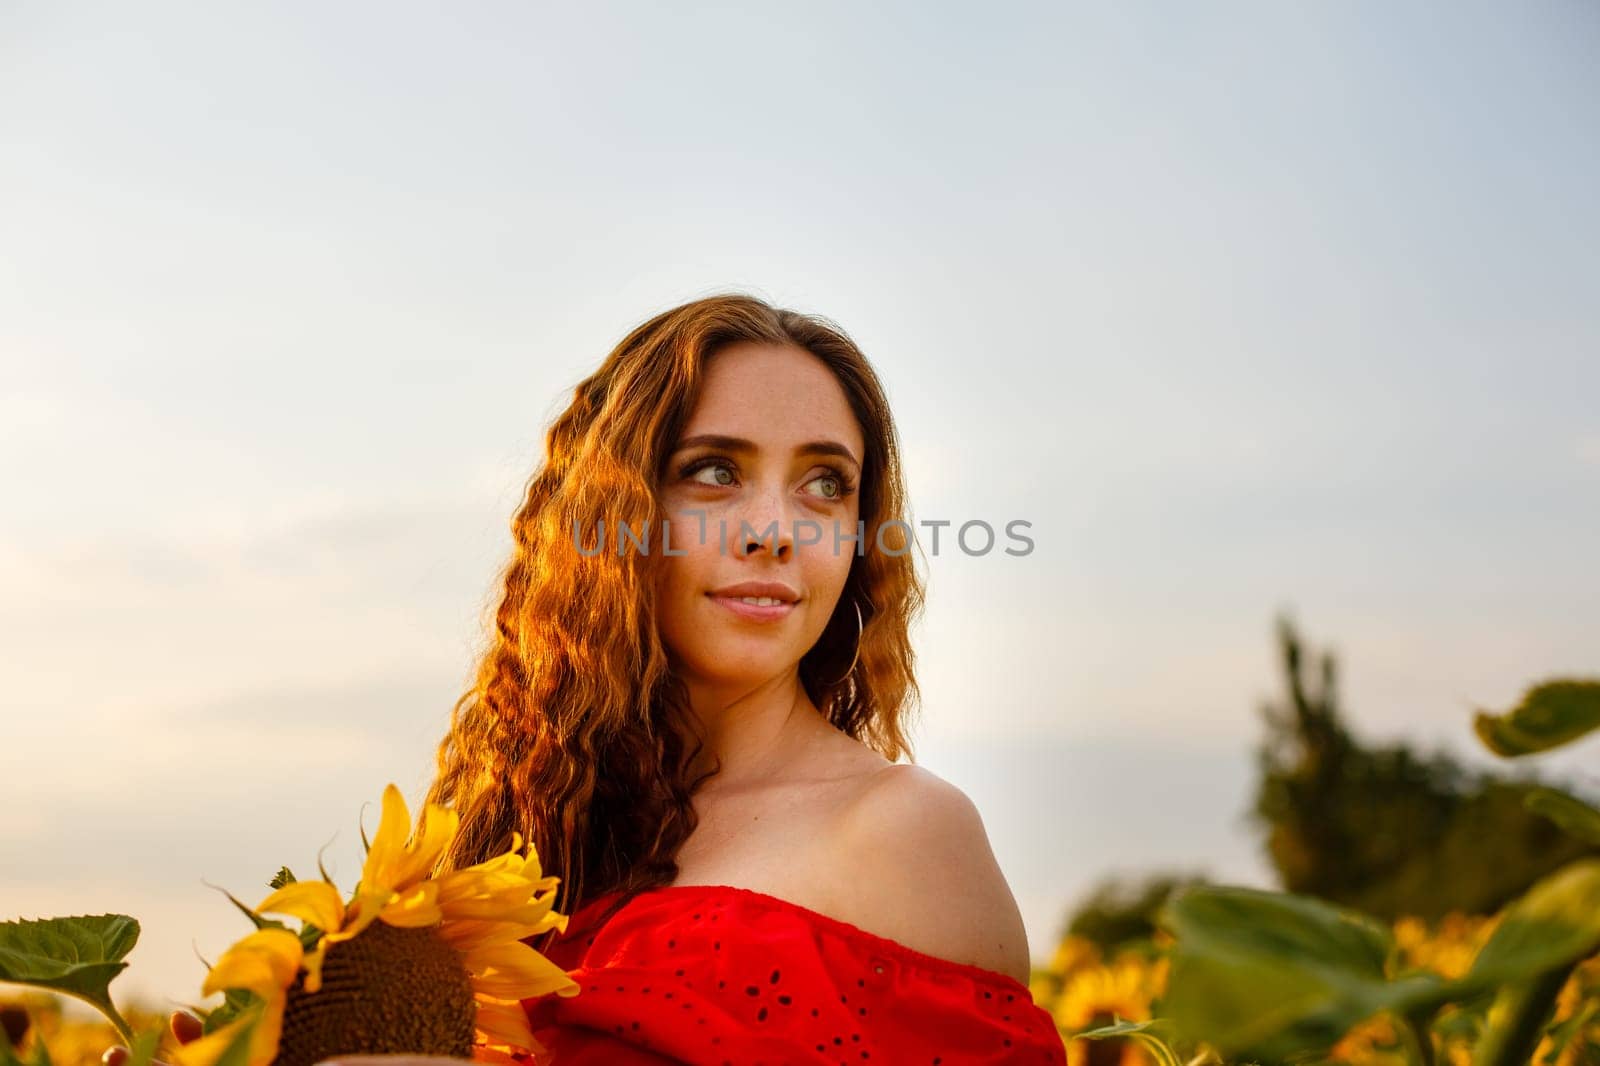 Young woman smiling at sunset in a field of sunflowers. by EkaterinaPereslavtseva